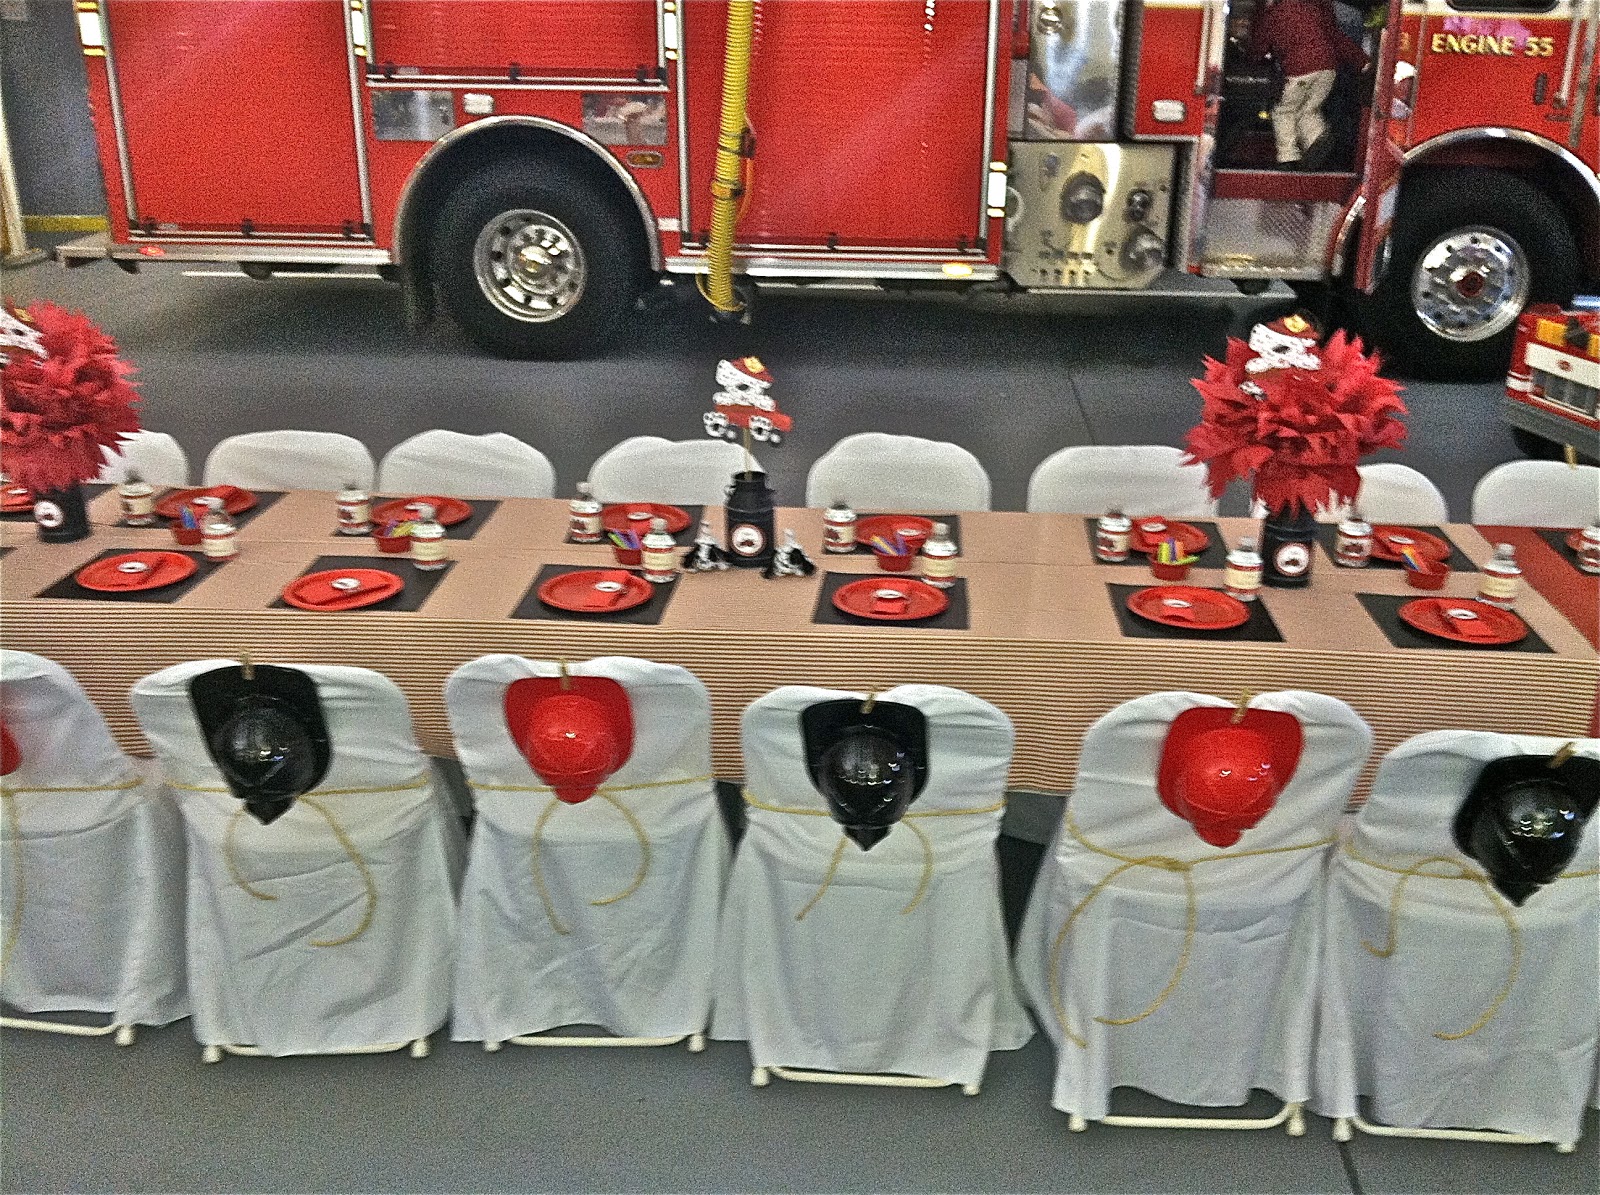 fire firefighter retirement department decorations centerpieces jack birthday table dept fireman blazin fighter theme hall backdrop parties christmas planmeapartyinpa station